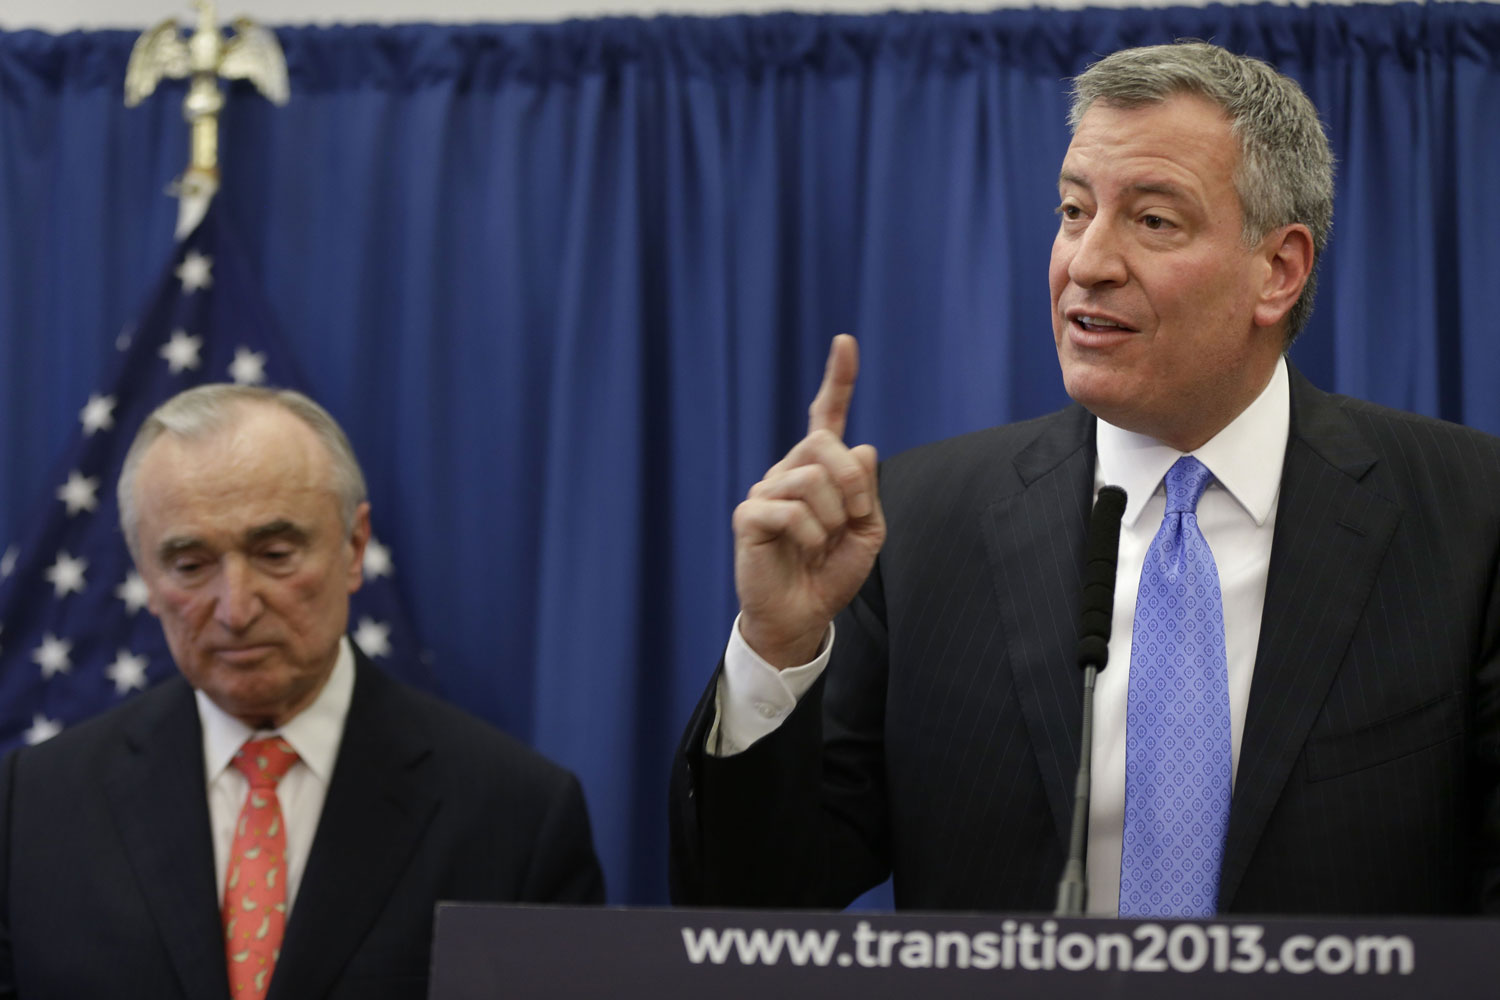 What’s at Stake in de Blasio’s Mayoralty? Just About Everything